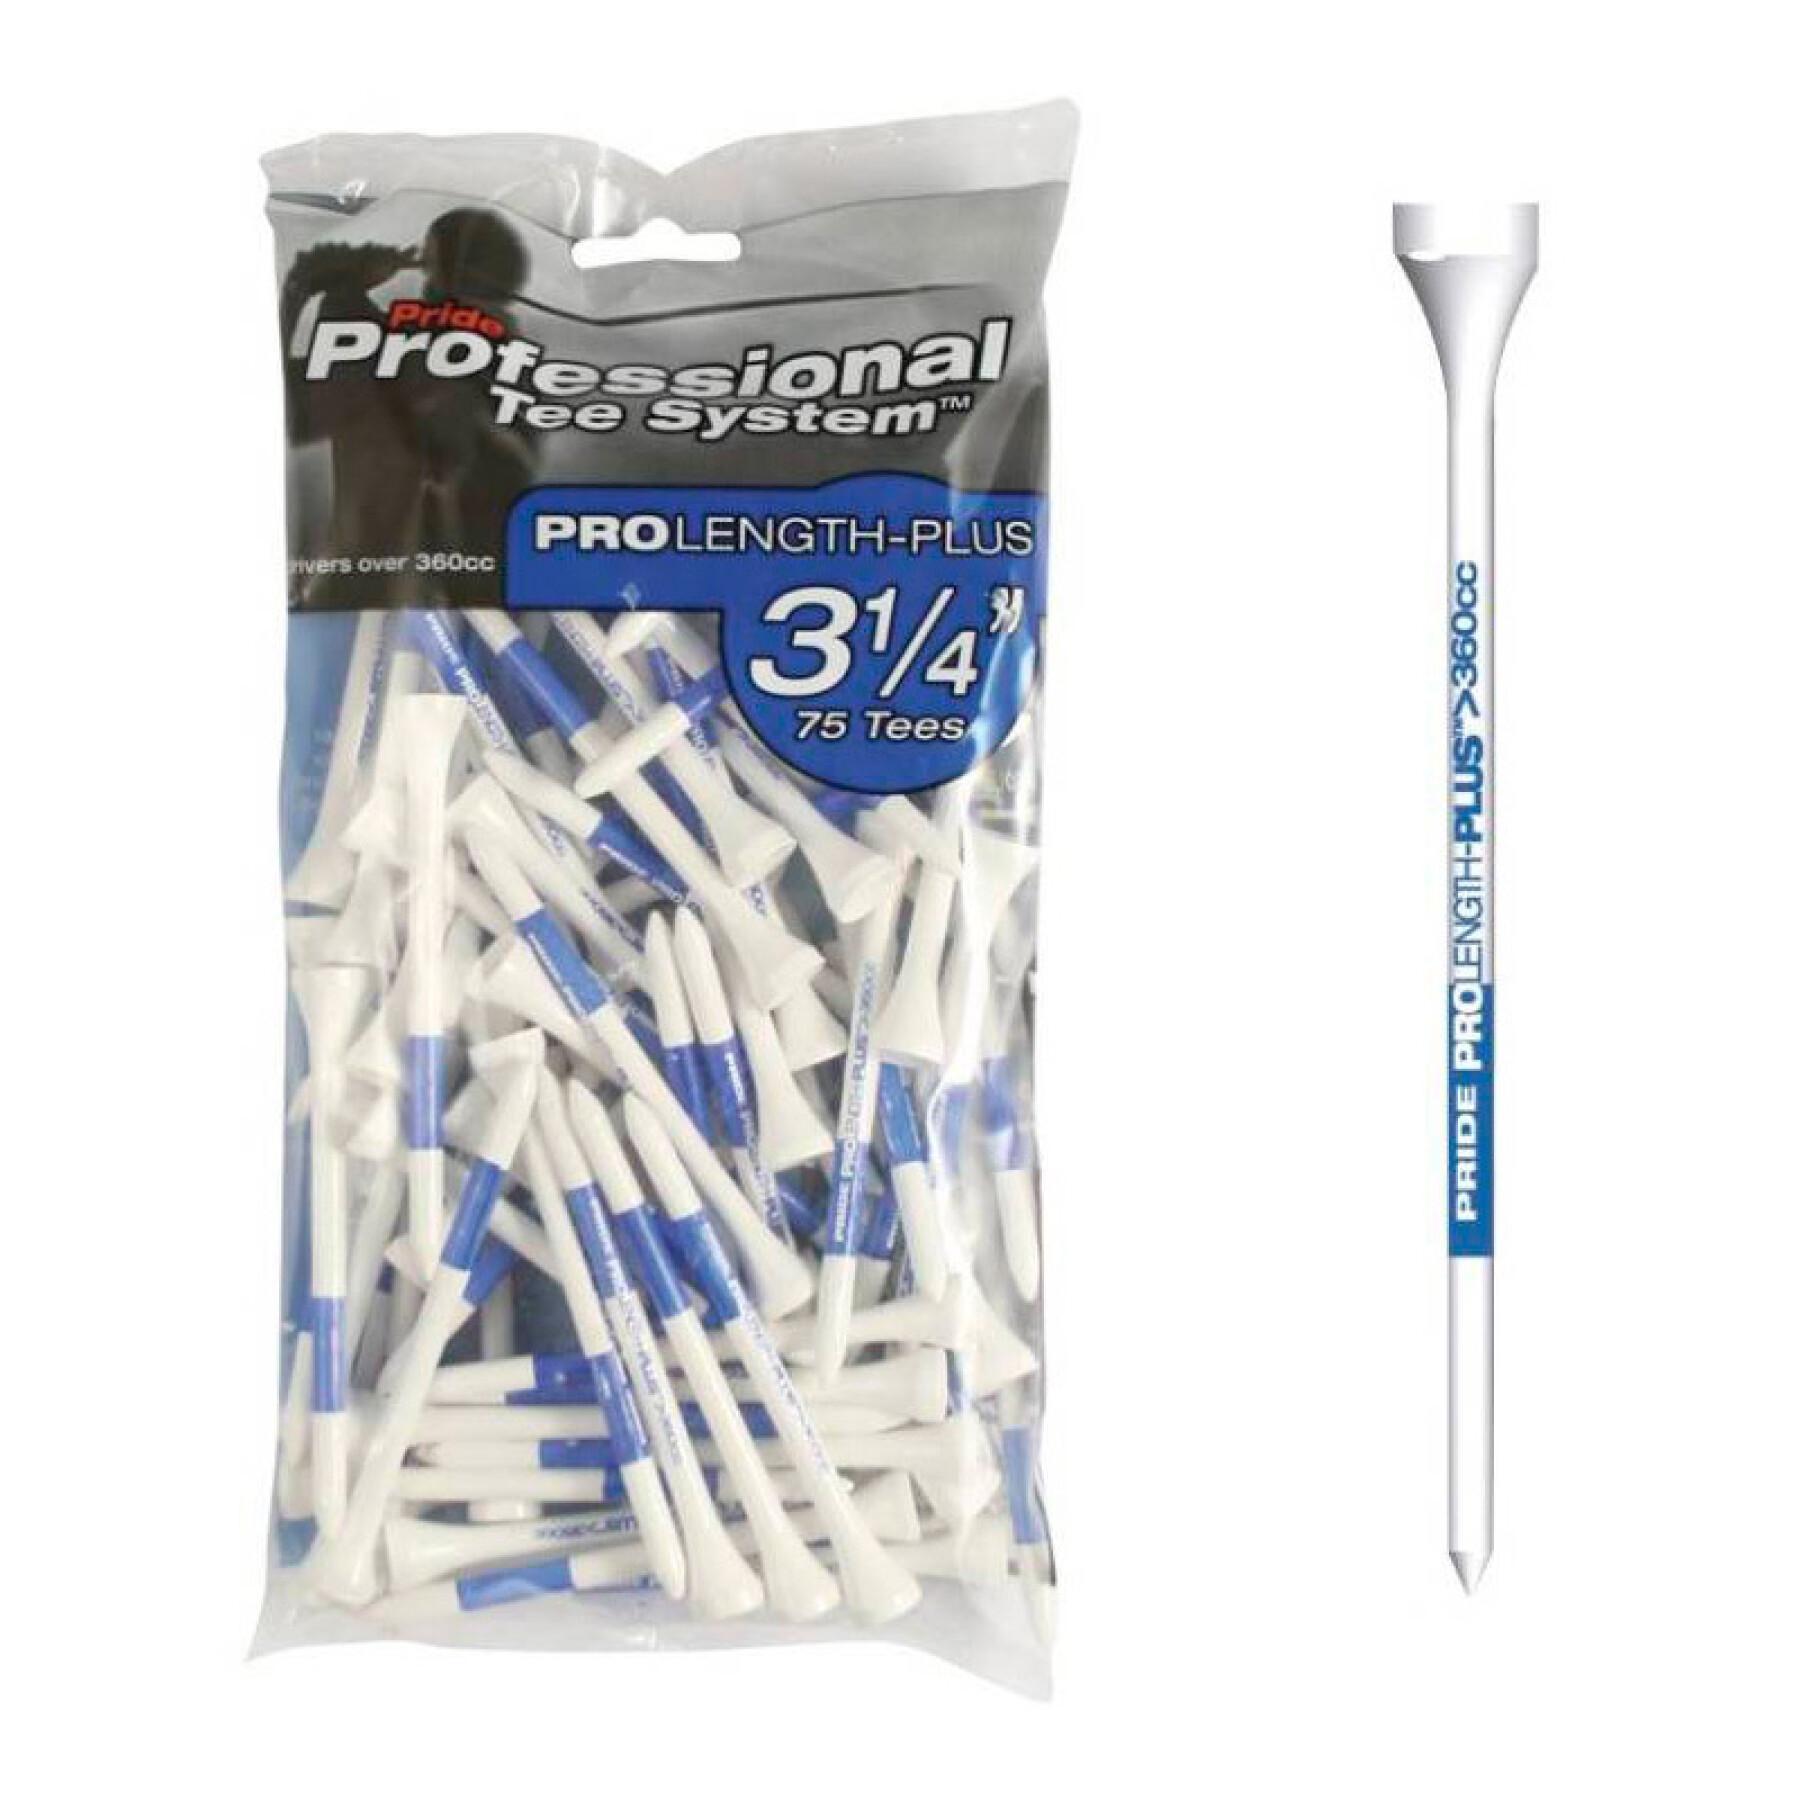 Lot von 75 Holiday Tees Golf pride professional system proLenght-plus 3 1/4″